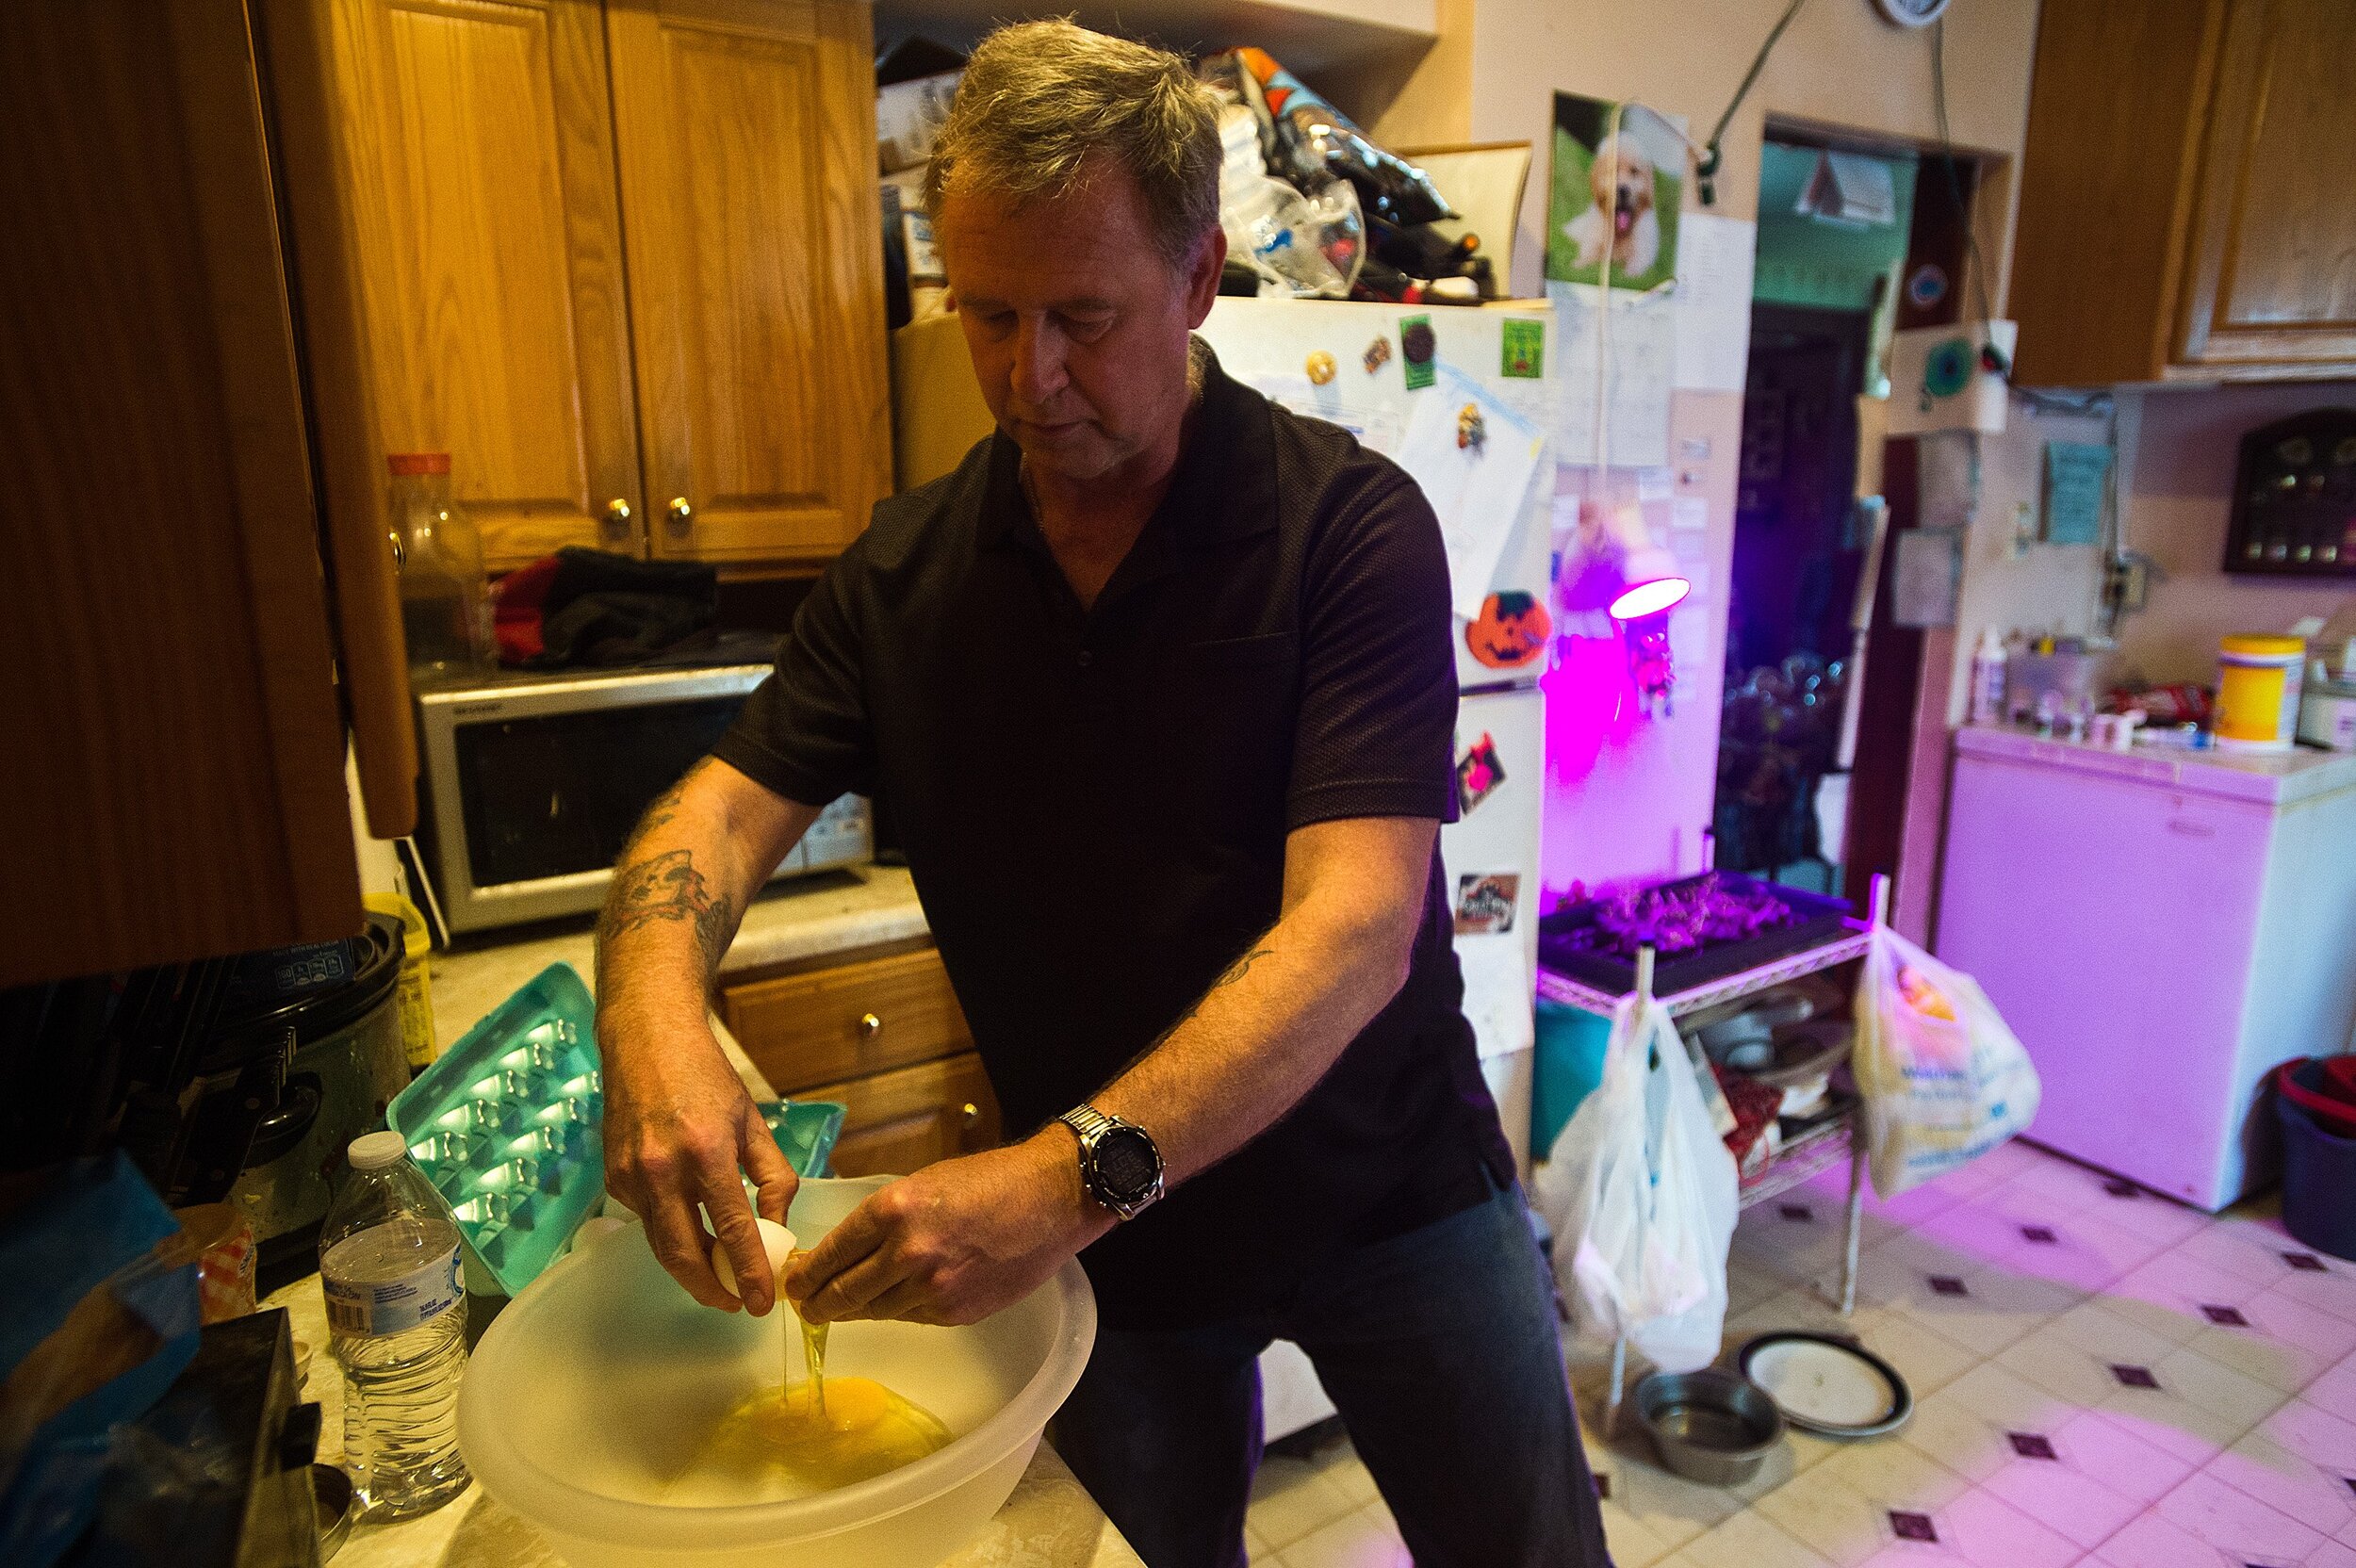  Dennis Fett breaks open eggs to bake dog treats on Tuesday, April 9, 2019, in the kitchen of his home in Roanoke, Illinois. Since undergoing deep brain stimulation surgery to ease his Parkinson's disease symptoms, Fett has been able to bake and cook